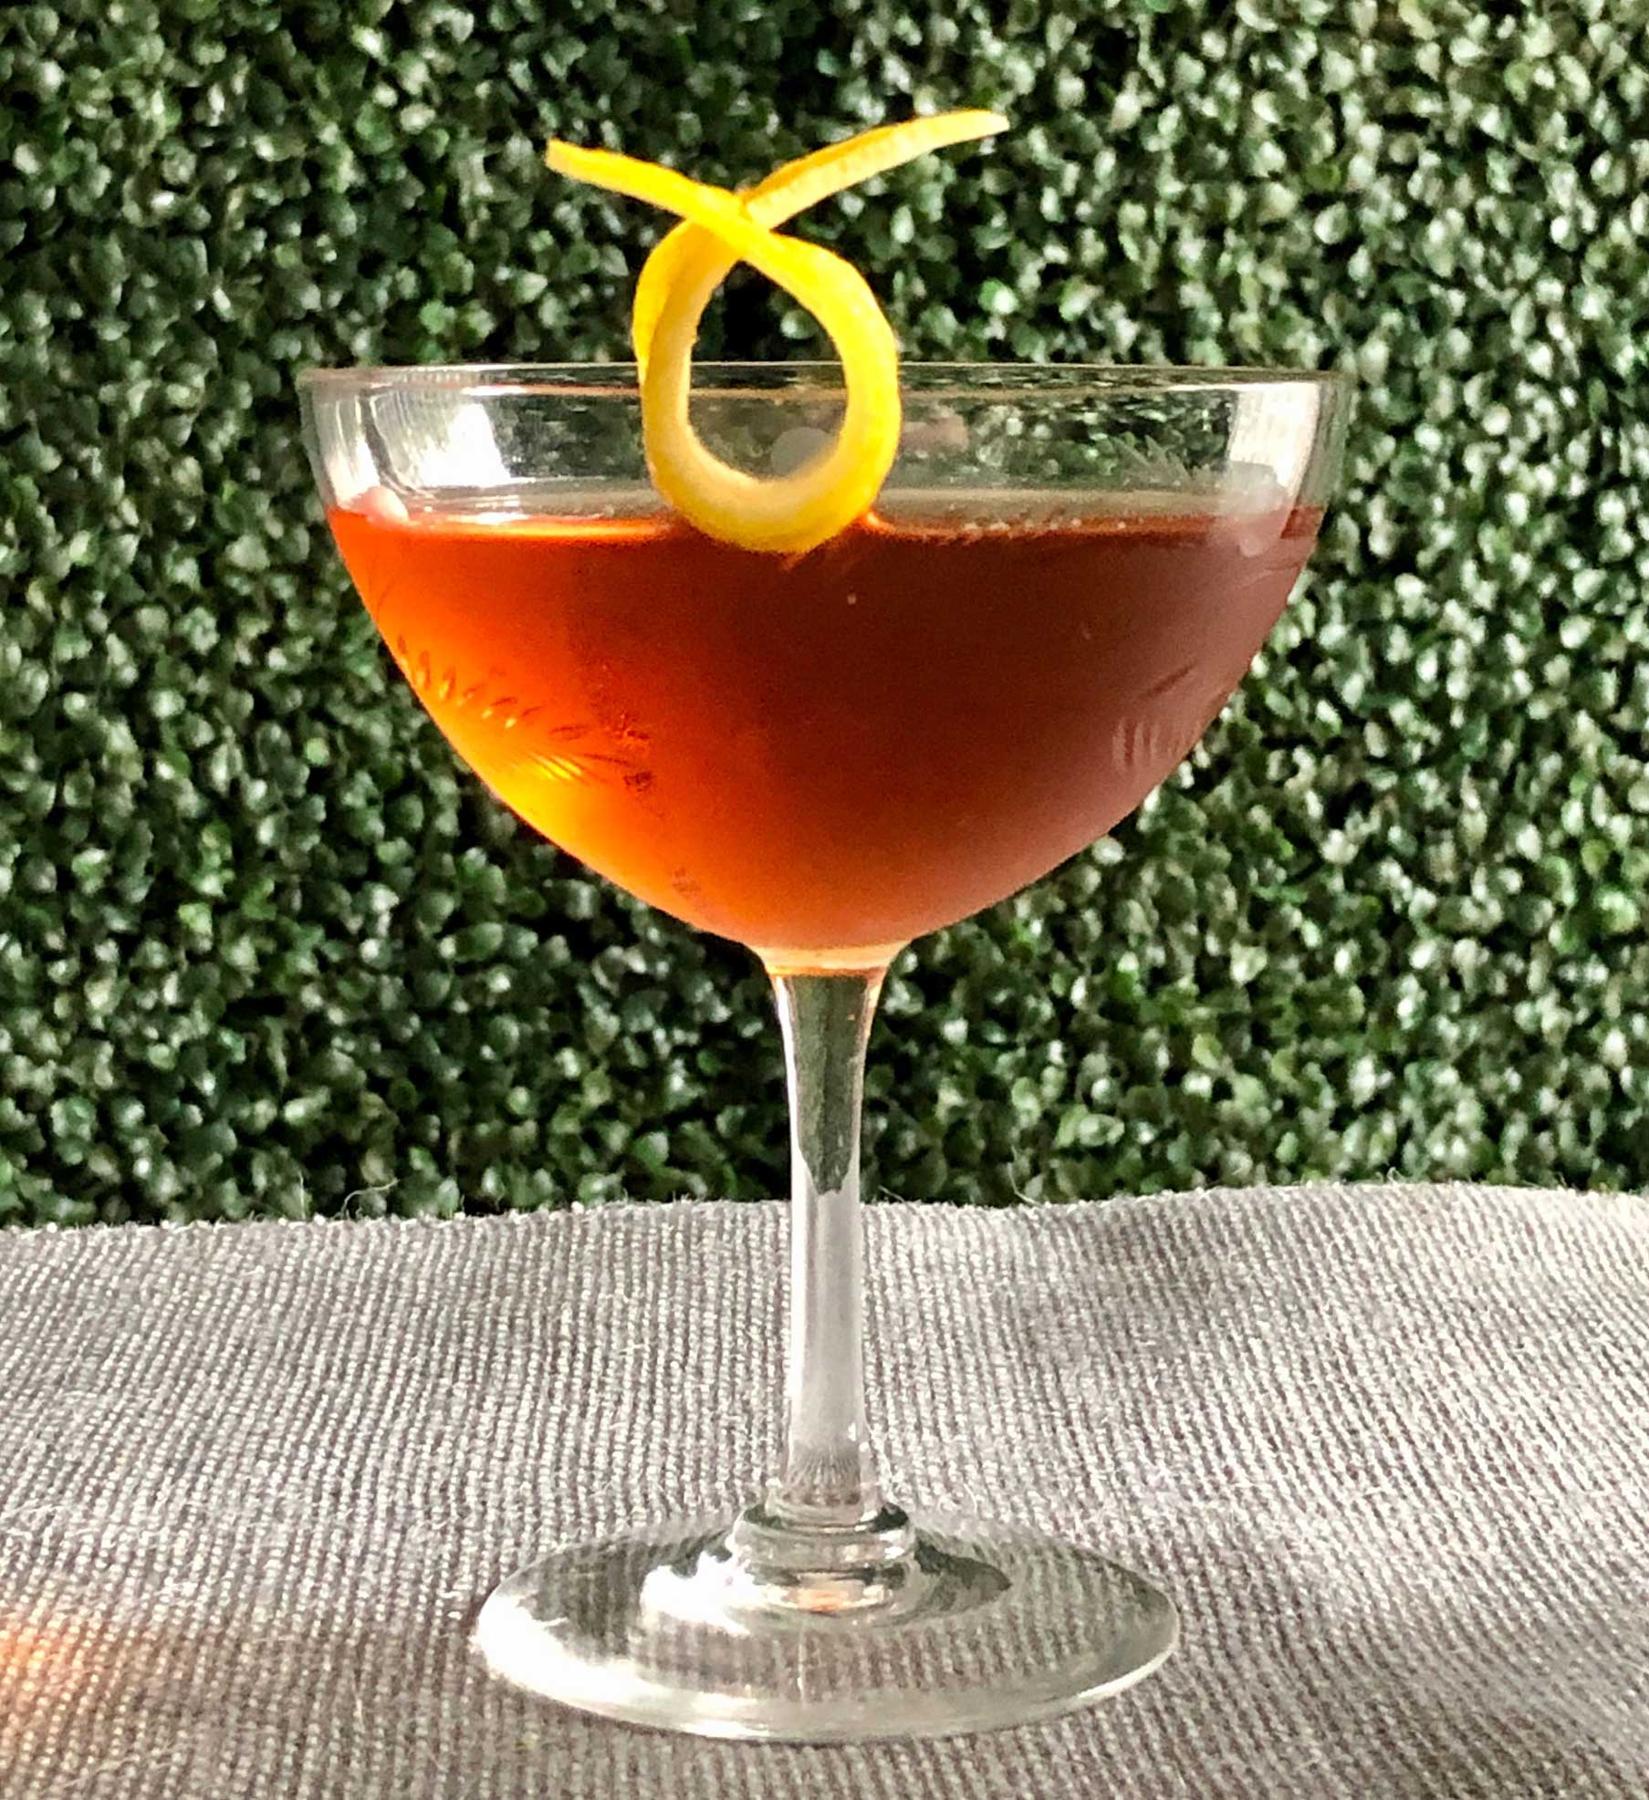 An example of the Mr. Burns, the mixed drink (drink), by Jon DeRosa, Oldfields Liquor Room, Los Angeles, featuring Dewar’s White Label, Cocchi Vermouth di Torino ‘Storico’, Zirbenz Stone Pine Liqueur of the Alps, and lemon twist; photo by Lee Edwards